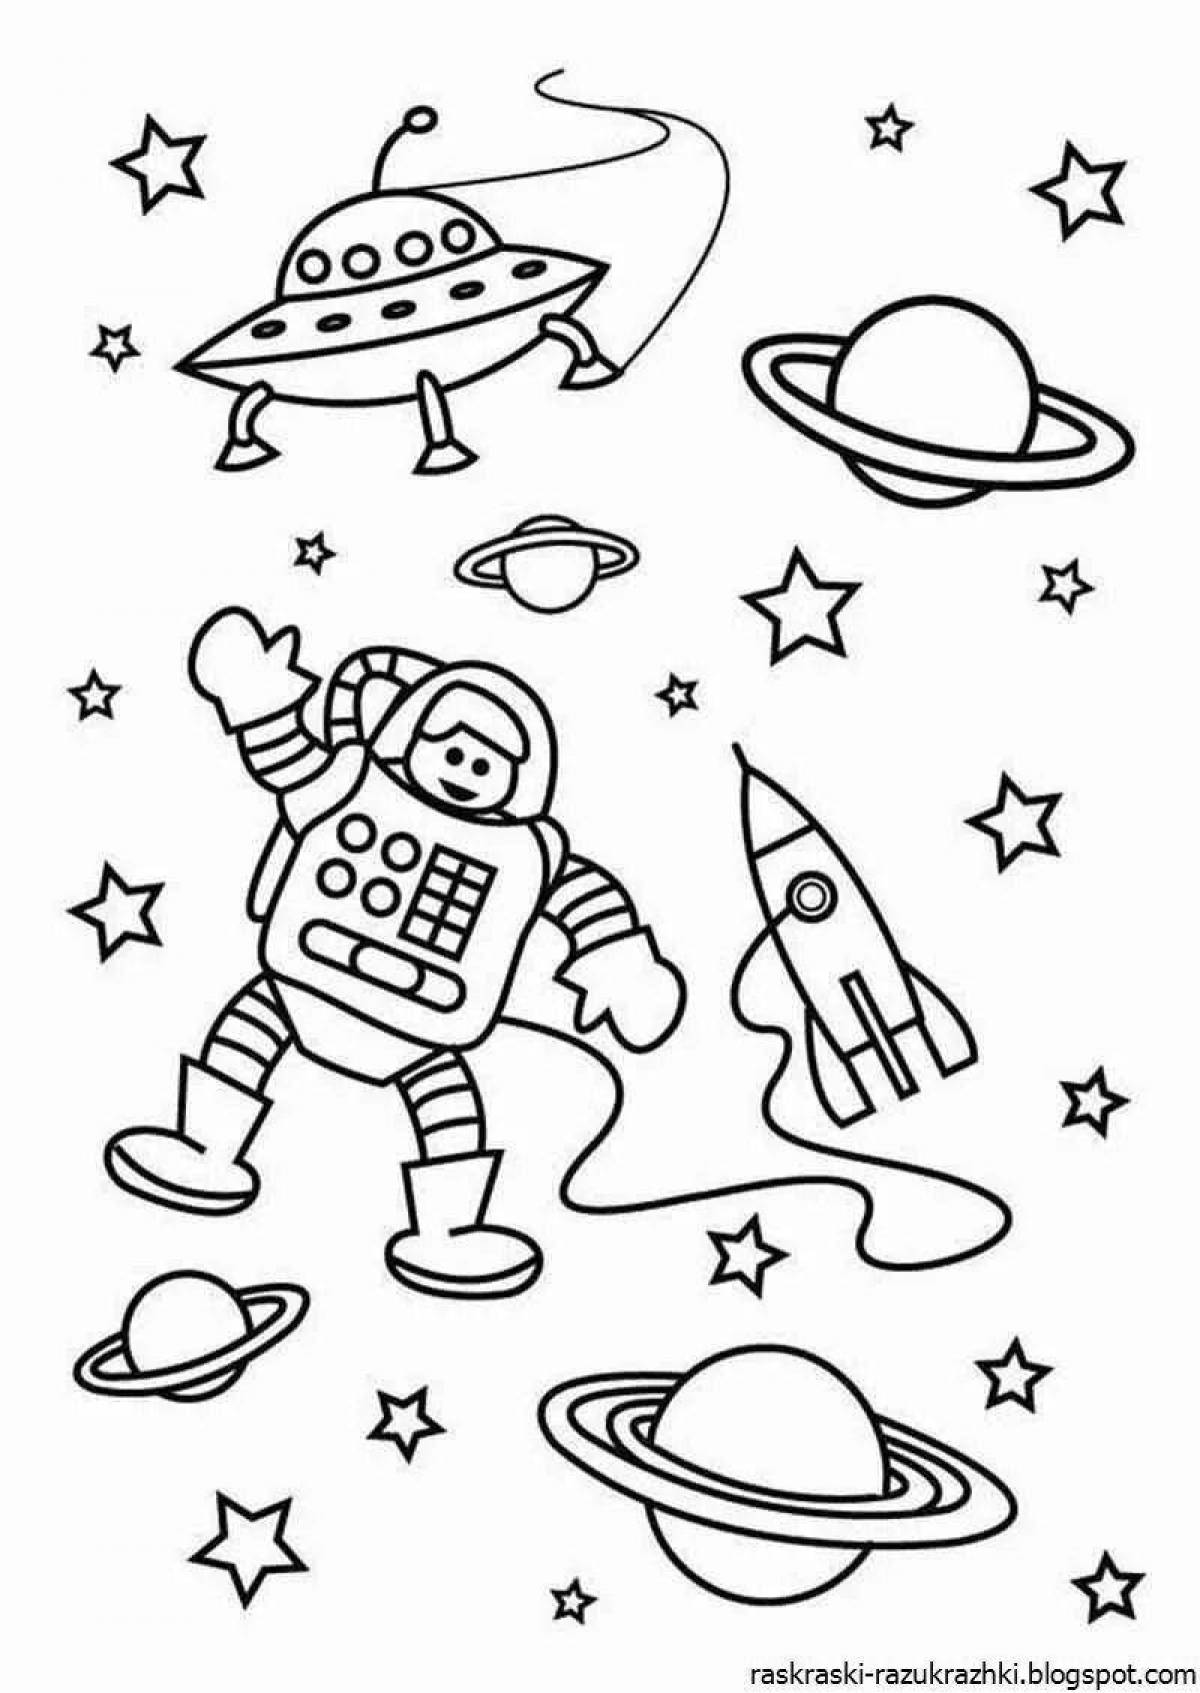 Joyful space and planets coloring page for kids